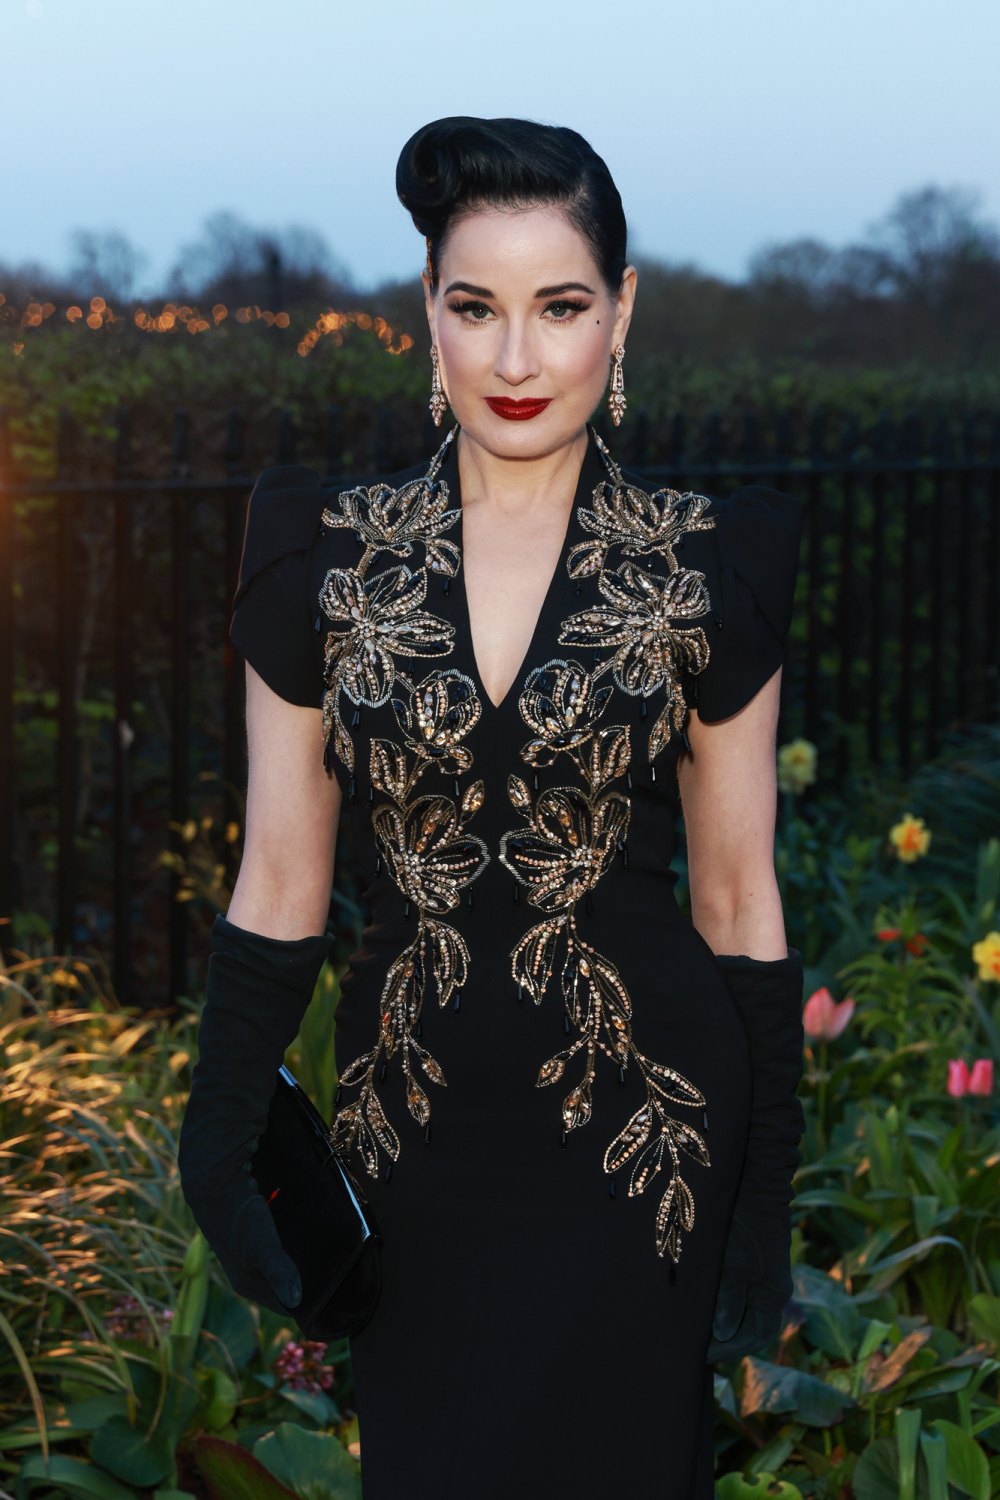 Dita Von Teese Would Like to Be Excluded From Any RHOSLC Conversation